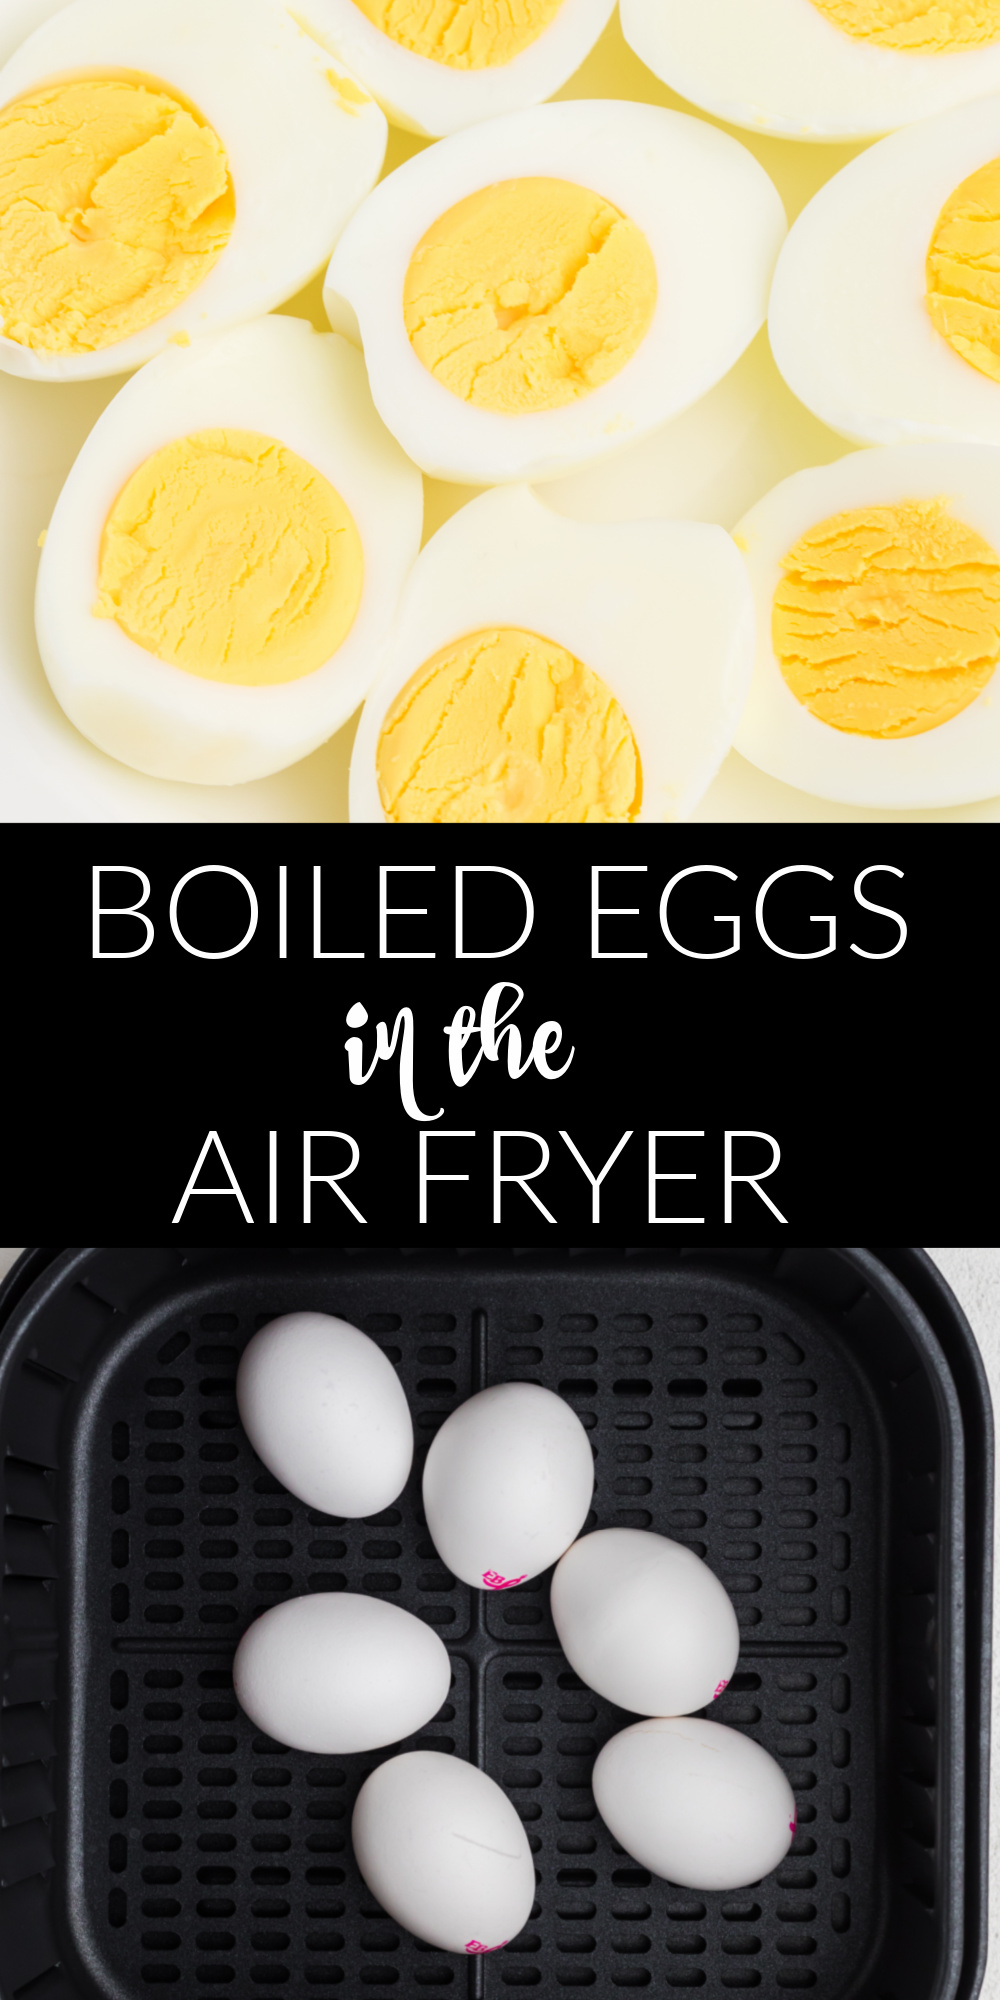 Did you know you can make air fryer boiled eggs? We'll show you step by step how to cook eggs in the air fryer with this quick and easy tutorial. You'll love this easy air fryer recipe and it's almost completely hands-off!